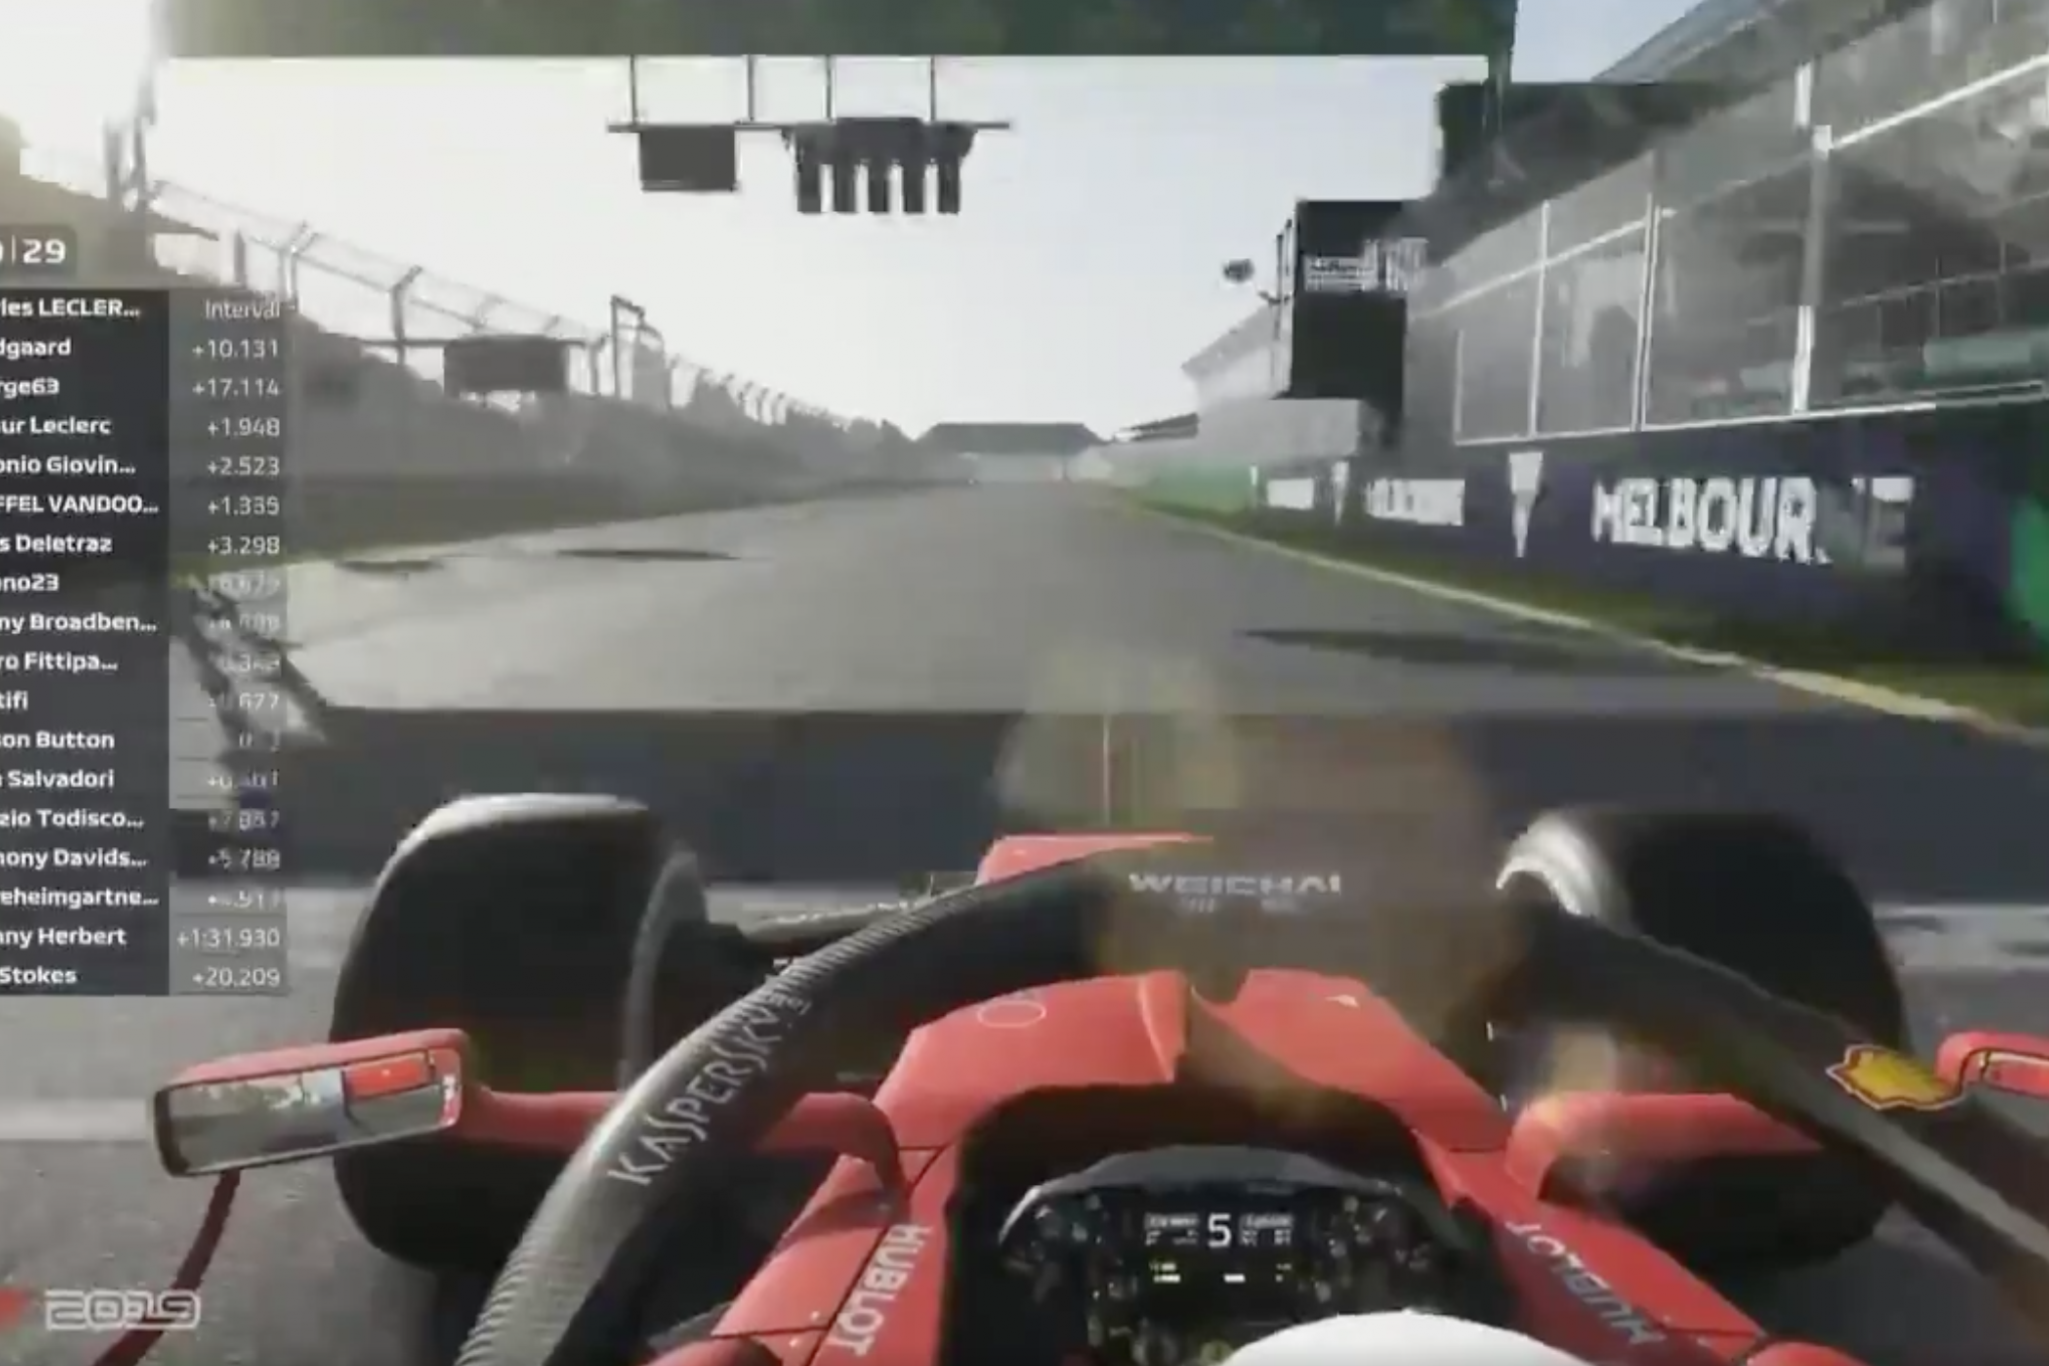 f1 online results